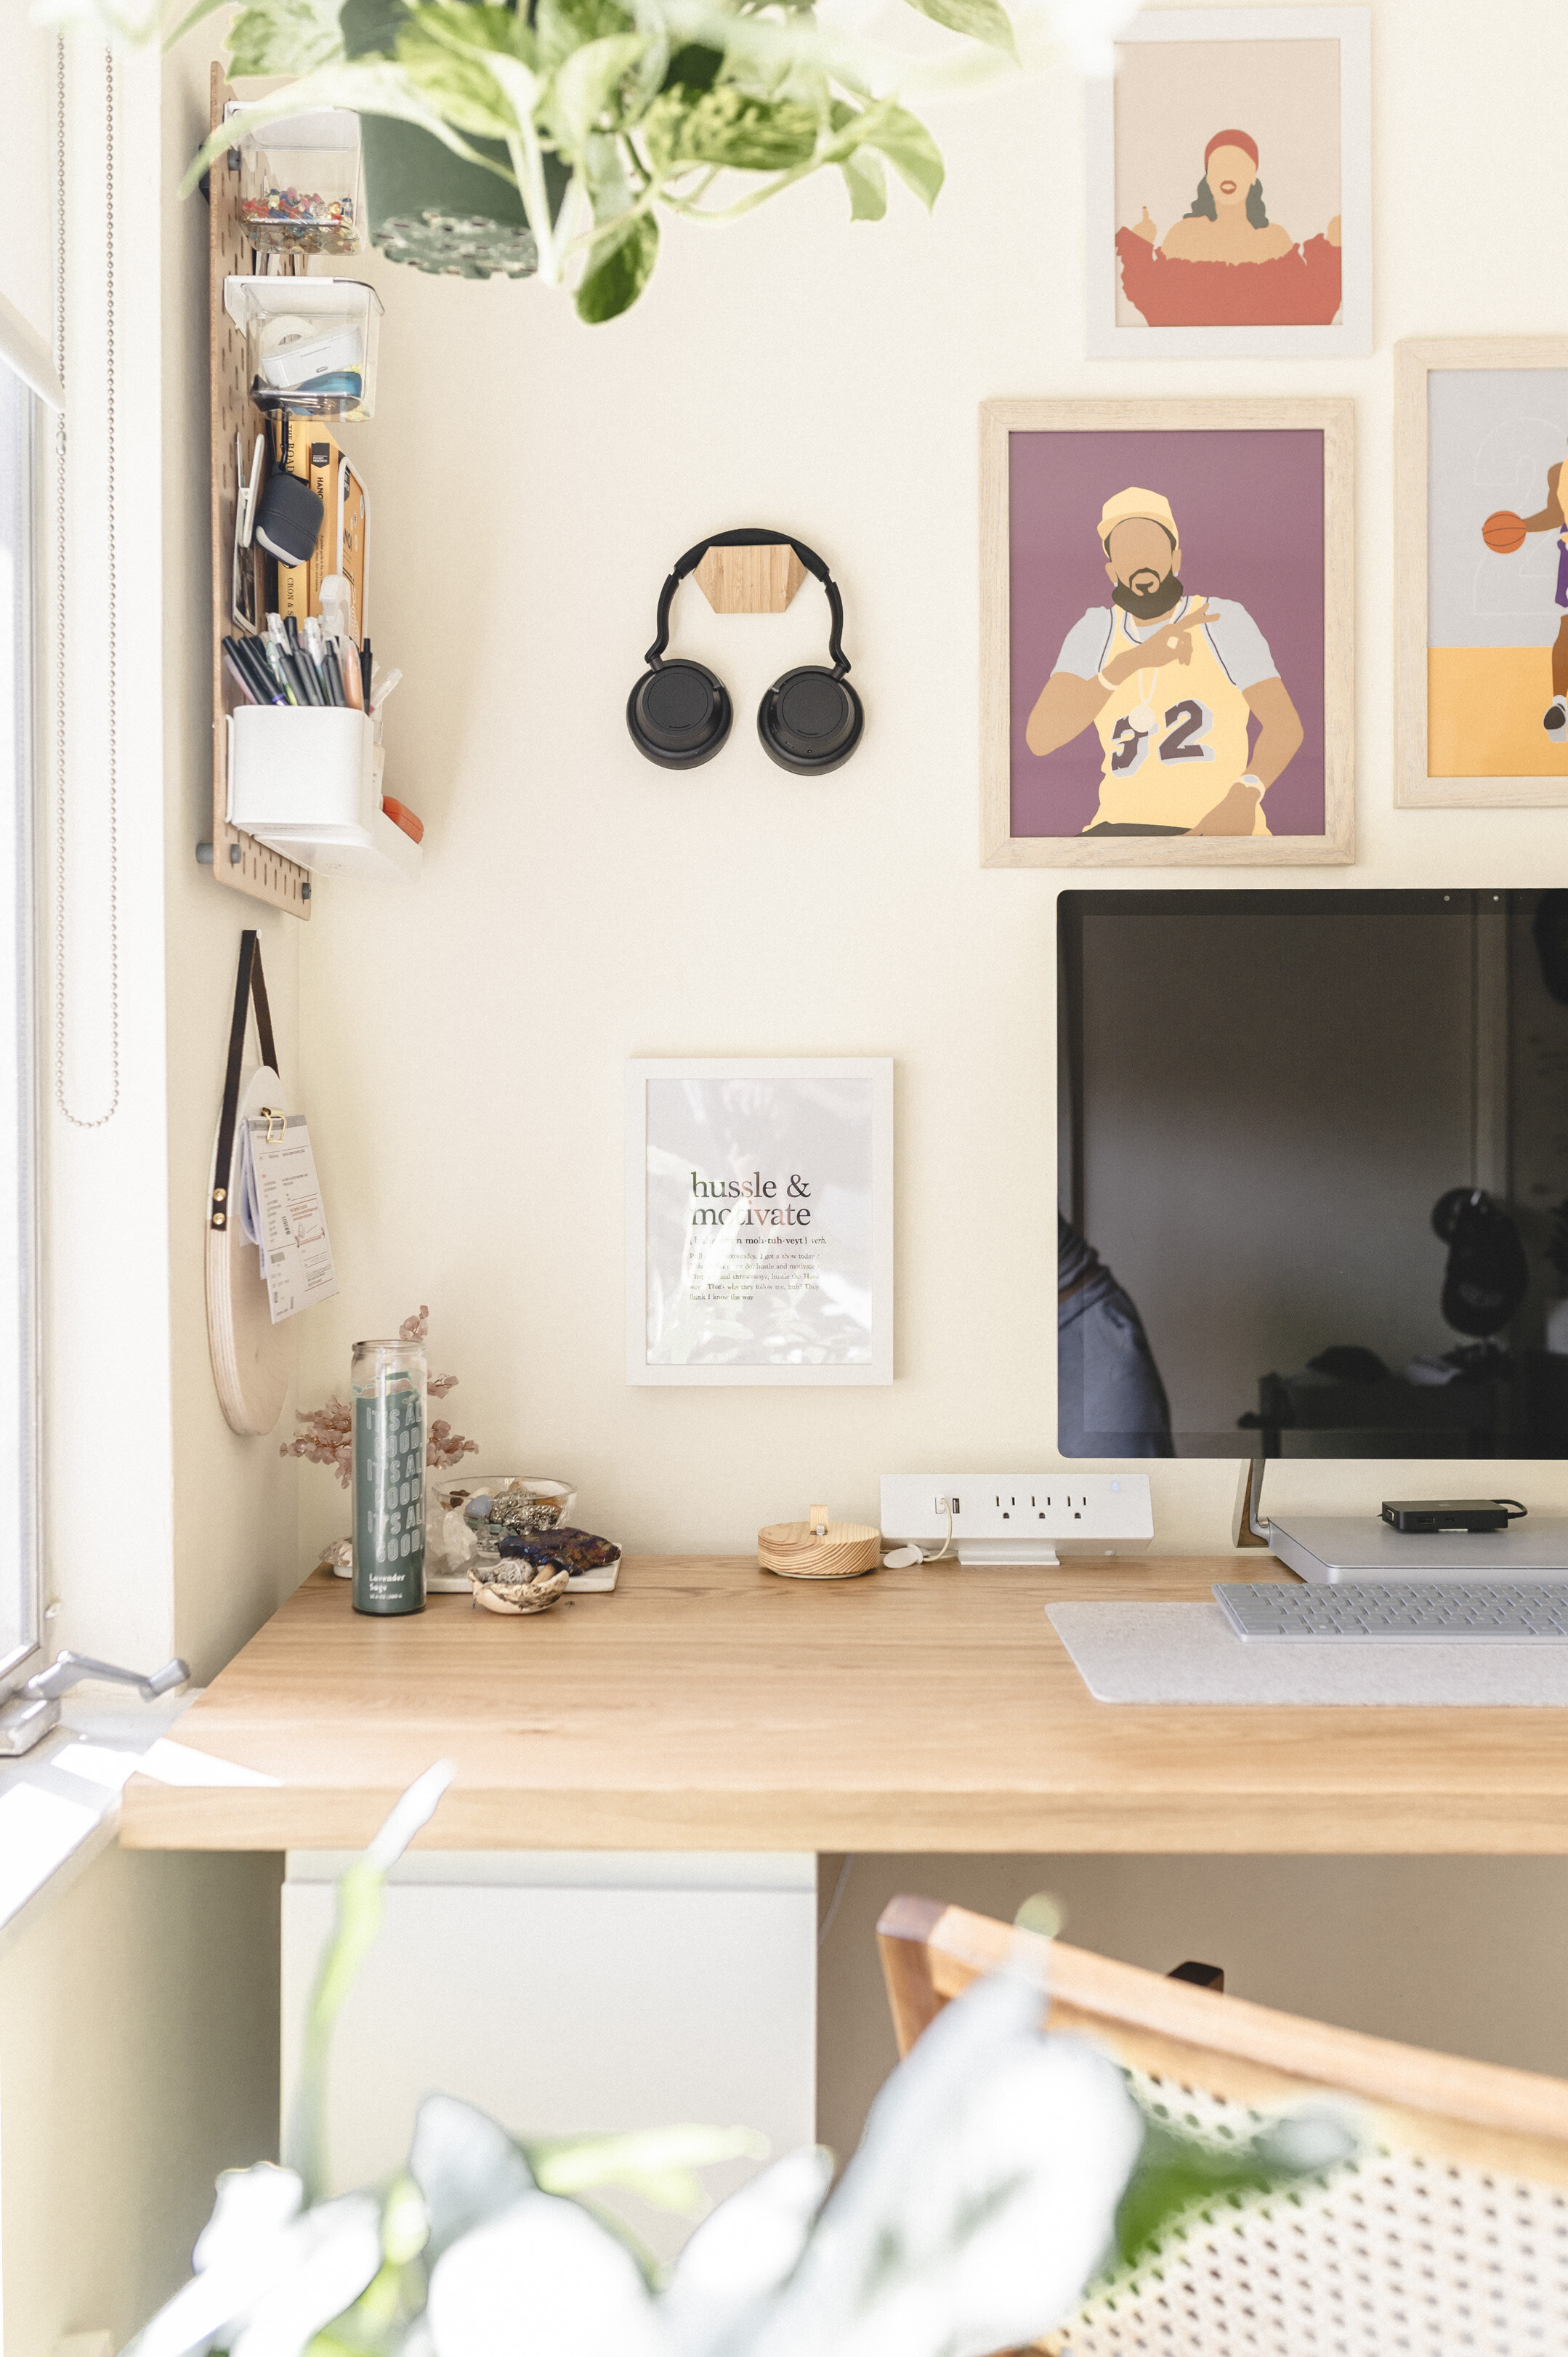 Our Ikea Desk Hack - A DIY Desk for Two — By Lisa Linh